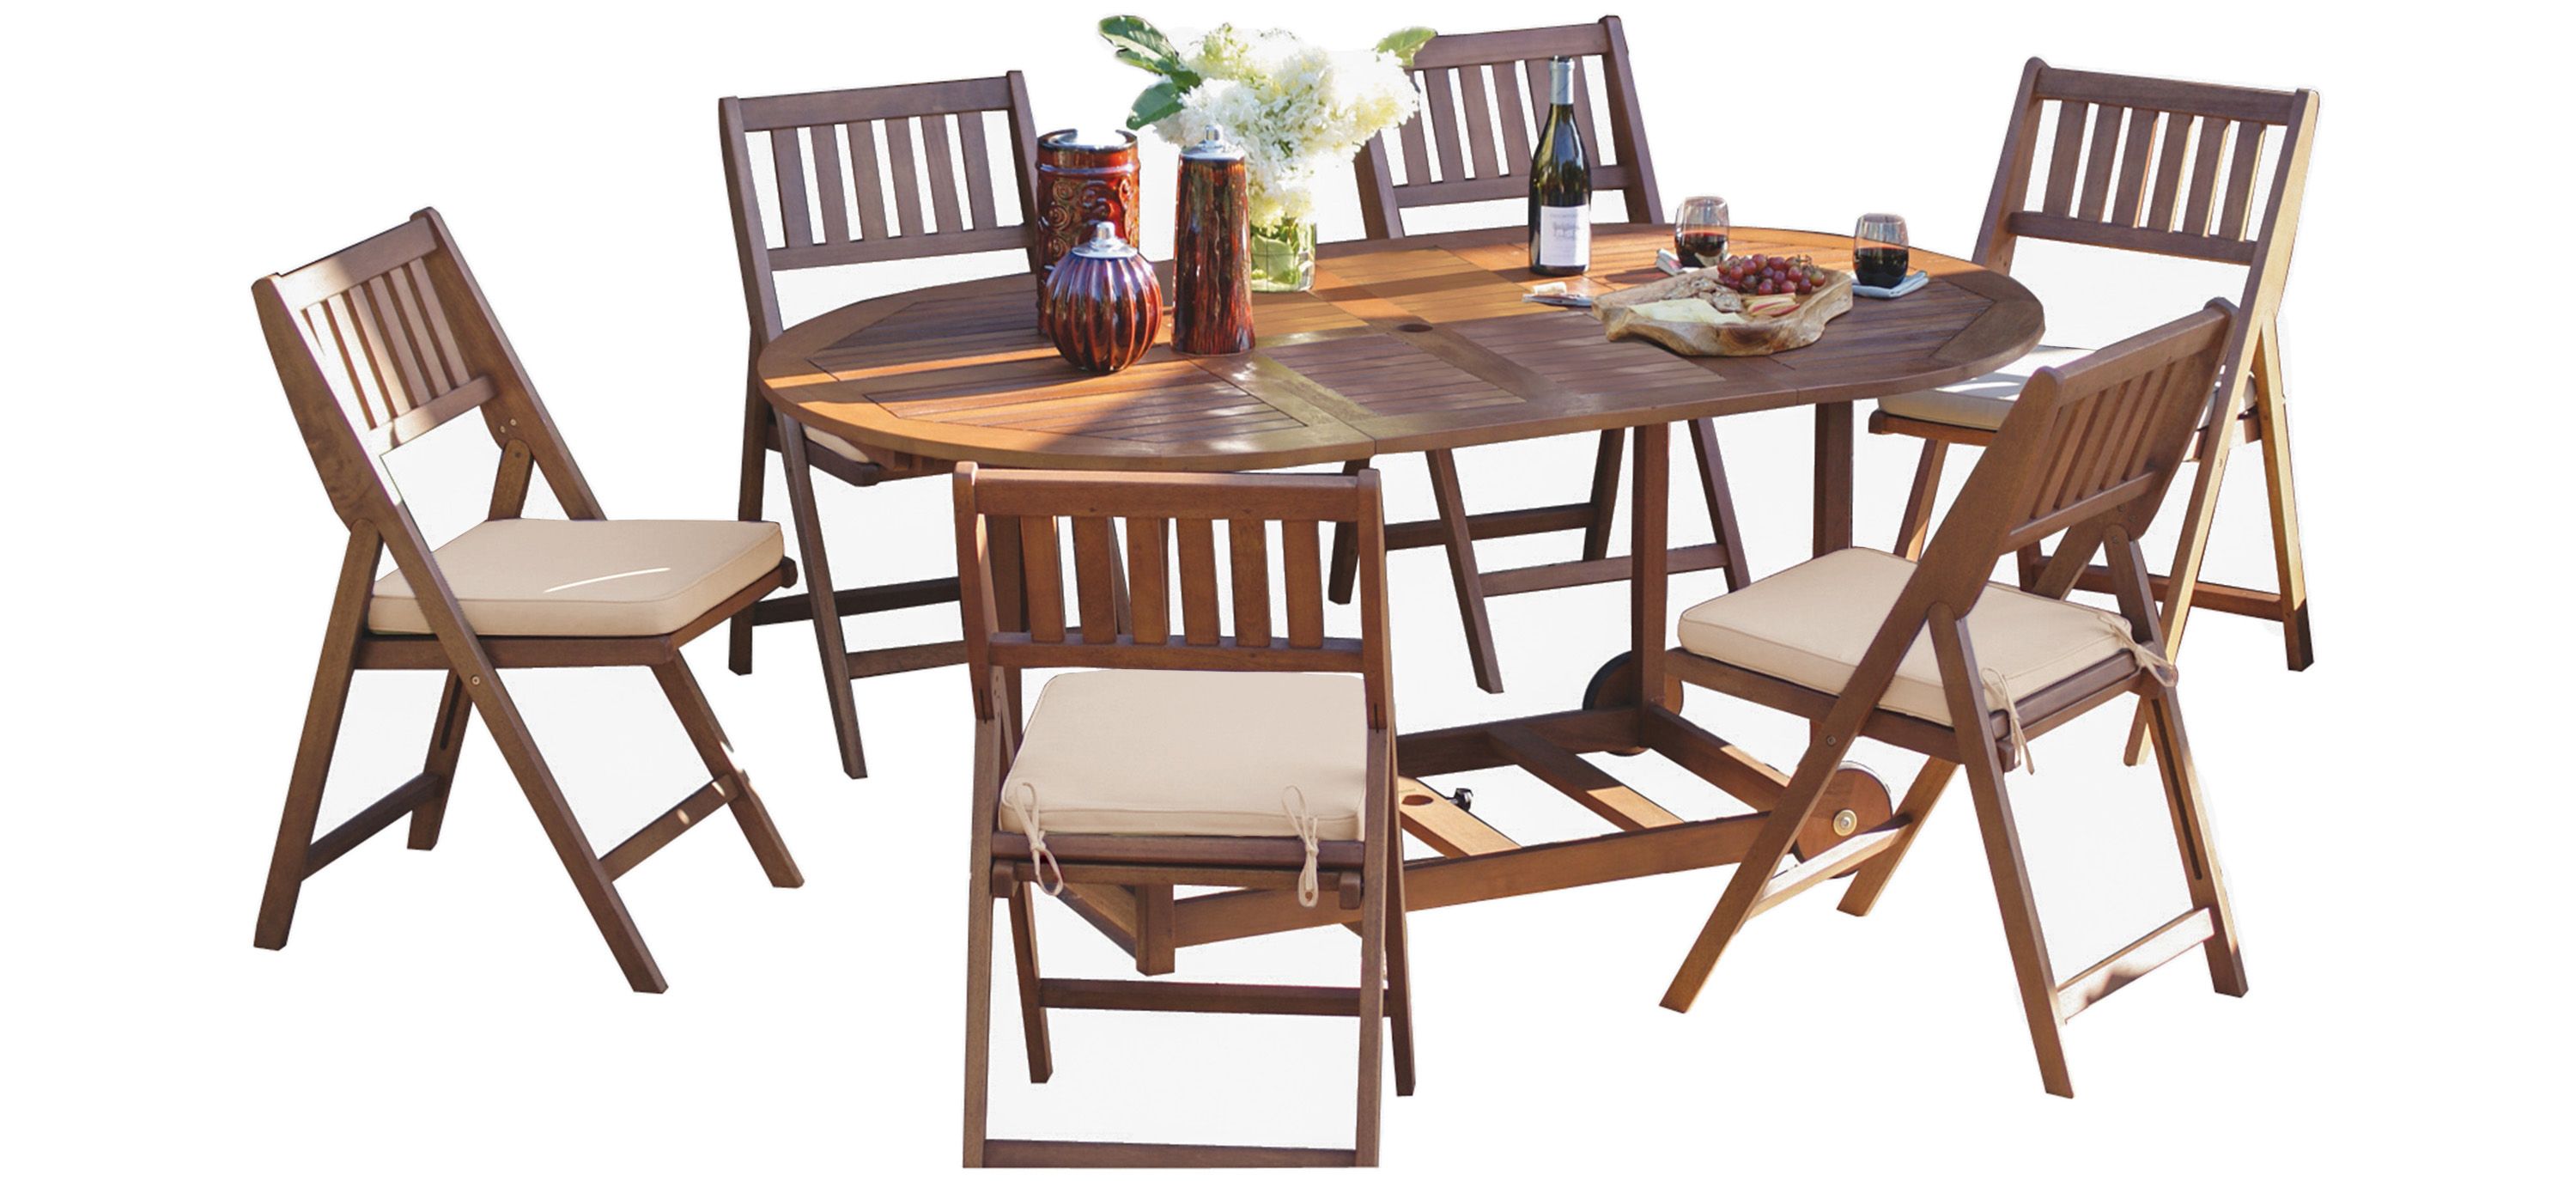 Apak 7-pc Fold and Store Dining Set